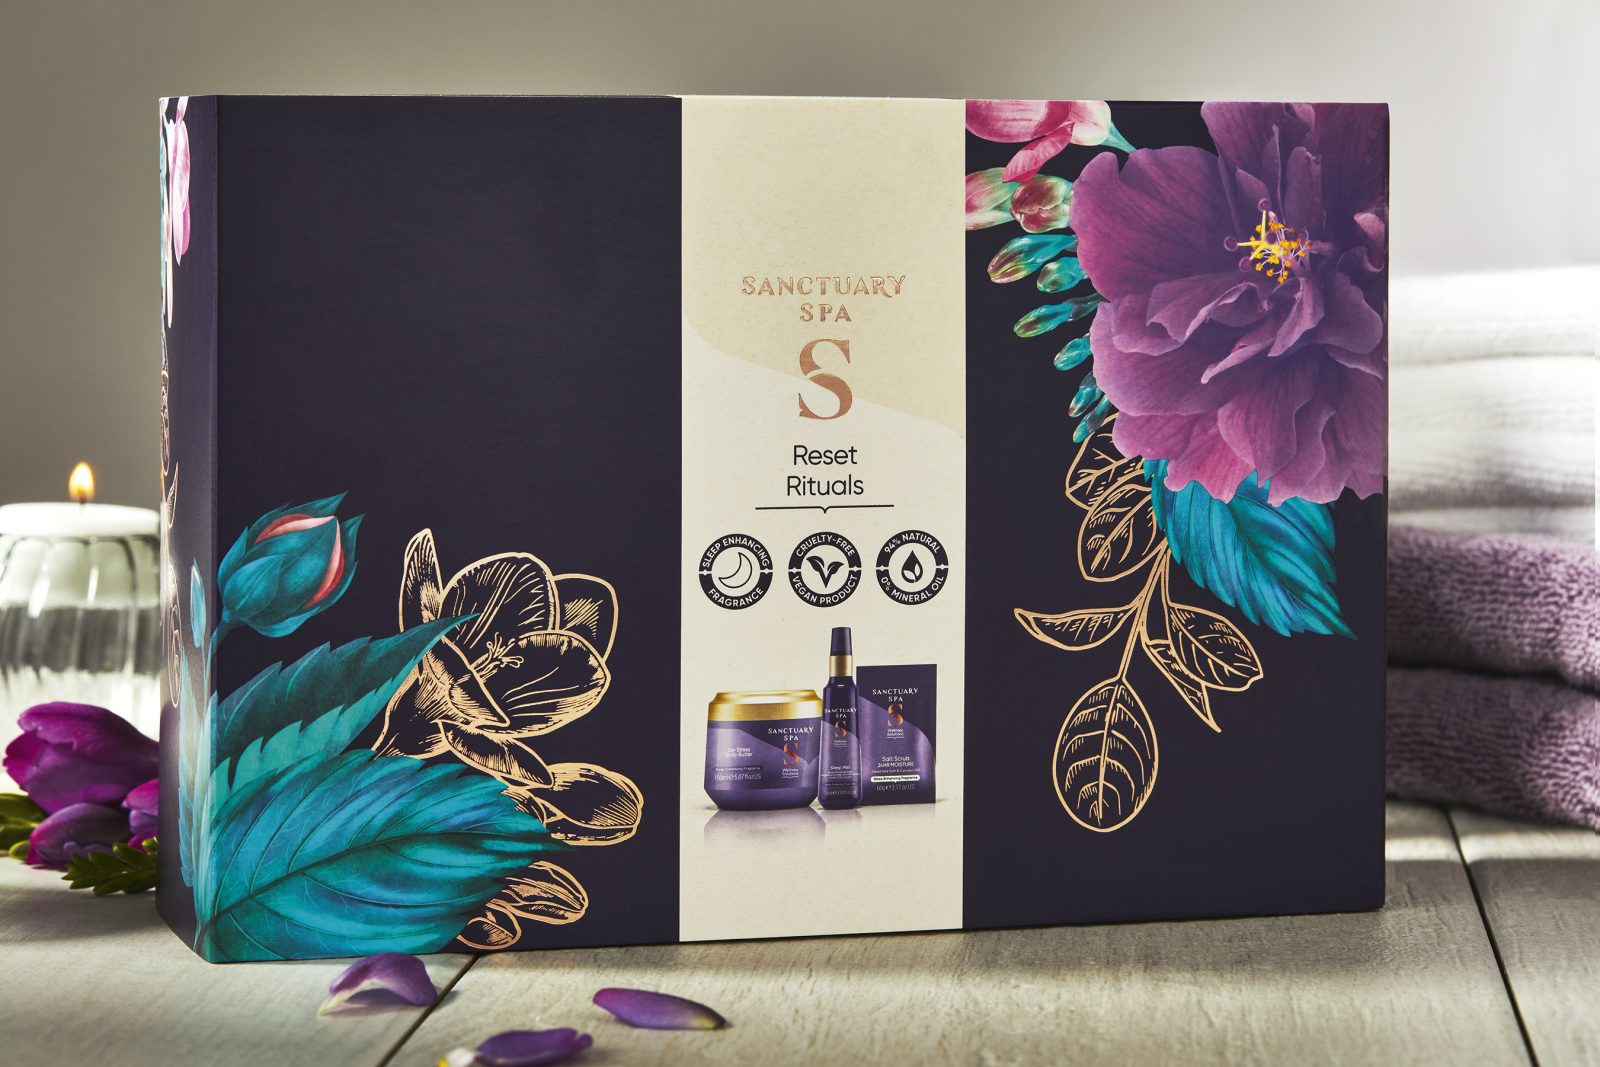 PZ Cussons Sanctuary Spa Packaging Design - World Brand Design Society